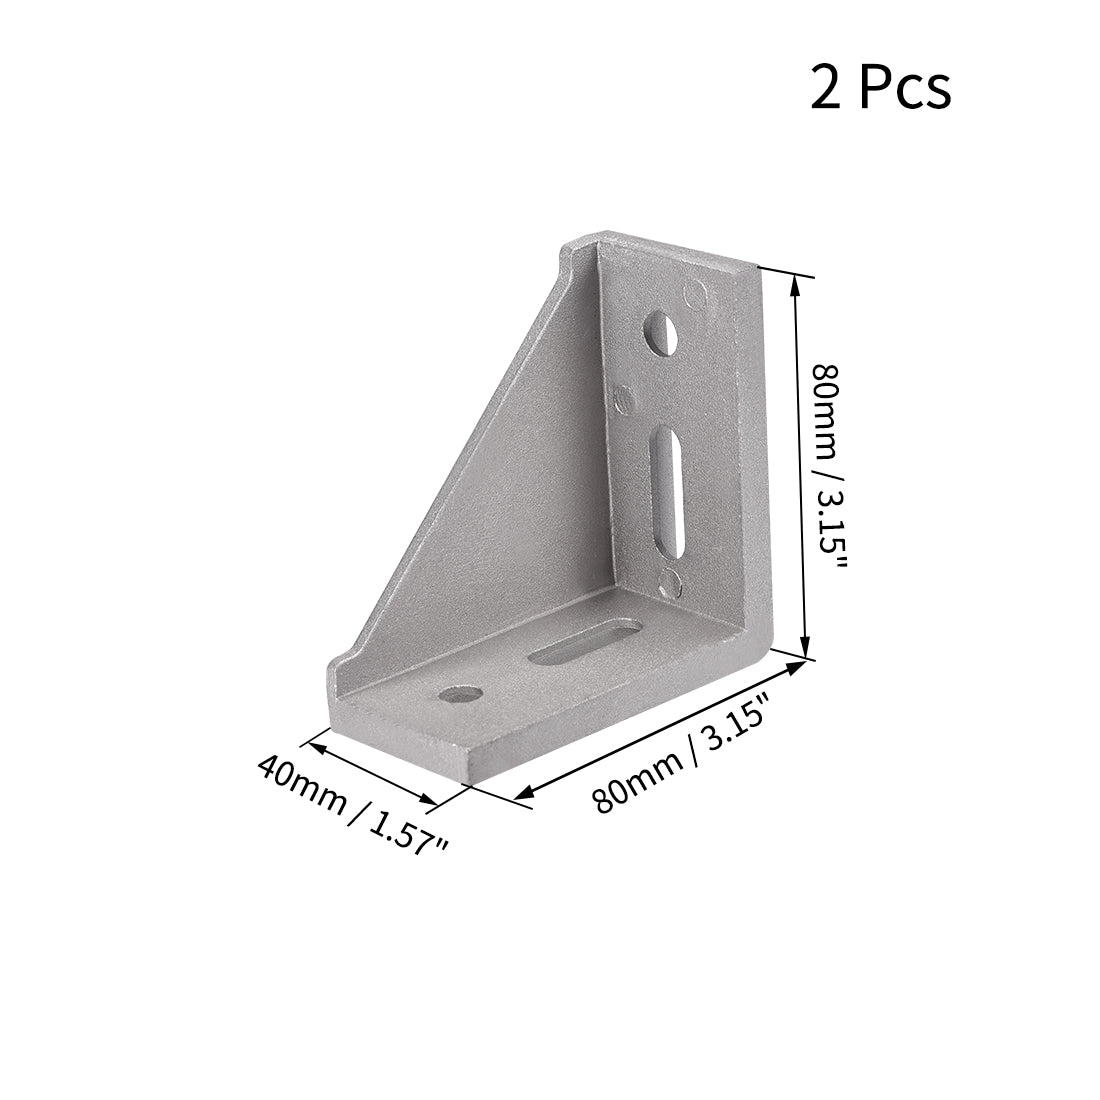 uxcell Uxcell Inside Corner Bracket Gusset, 80mm x 80mm for 4040 Series Aluminum Extrusion Profile with Slot 8mm, 2 Pcs (Silver)